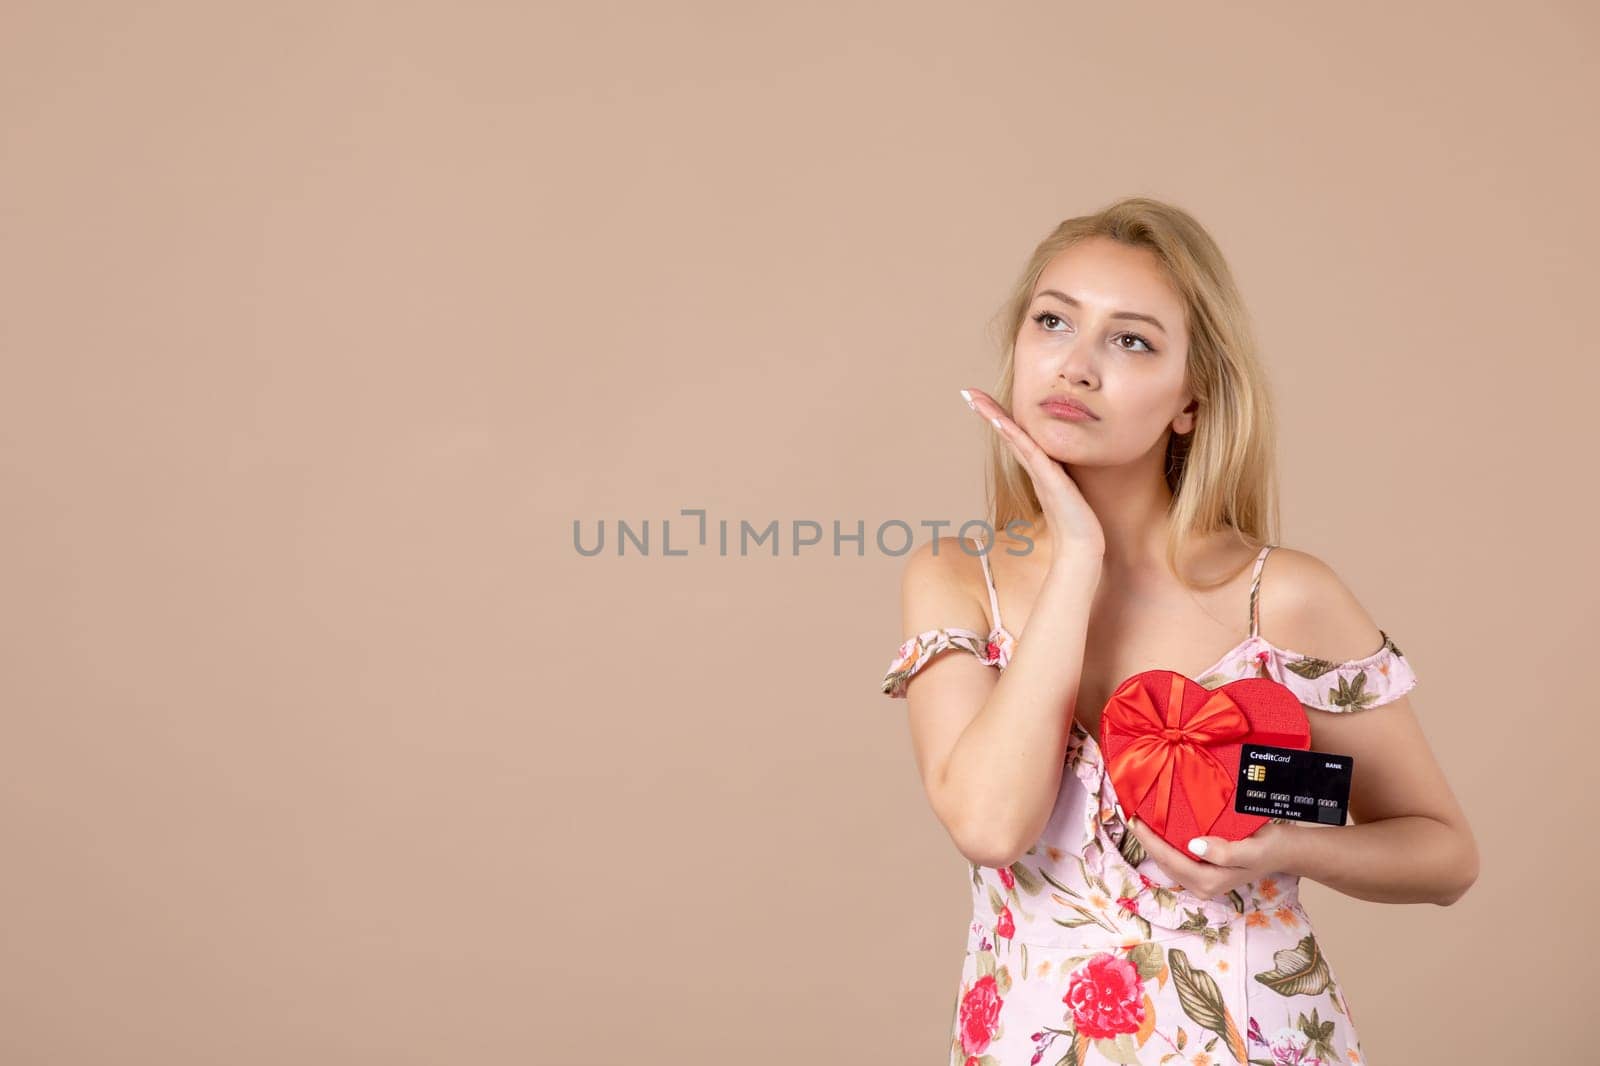 front view young female posing with red heart shaped present and bank card on brown background money march horizontal woman equality sensual by Kamran